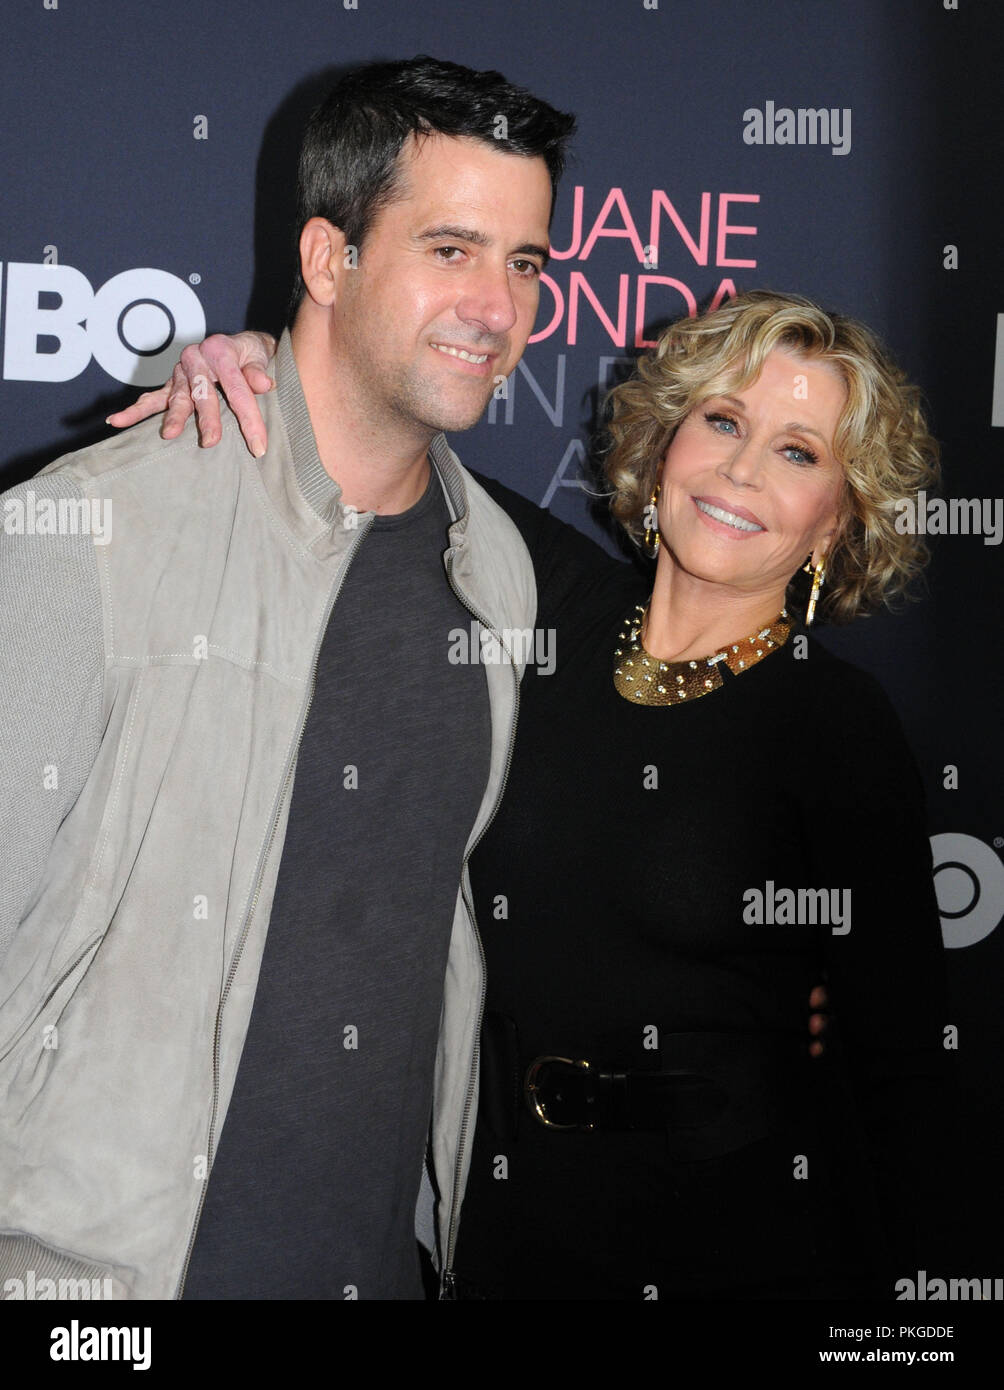 Los Angeles, USA. 13th Sep 2018. Actor Troy Garity and his mother actress Jane Fonda attend HBO Presents The Los Angeles Premiere of the HBO Documentary Film 'Jane Fonda In Five Acts' on September 13, 2018 at Hammer Museum in Los Angeles, California. Photo by Barry King/Alamy Live News Stock Photo